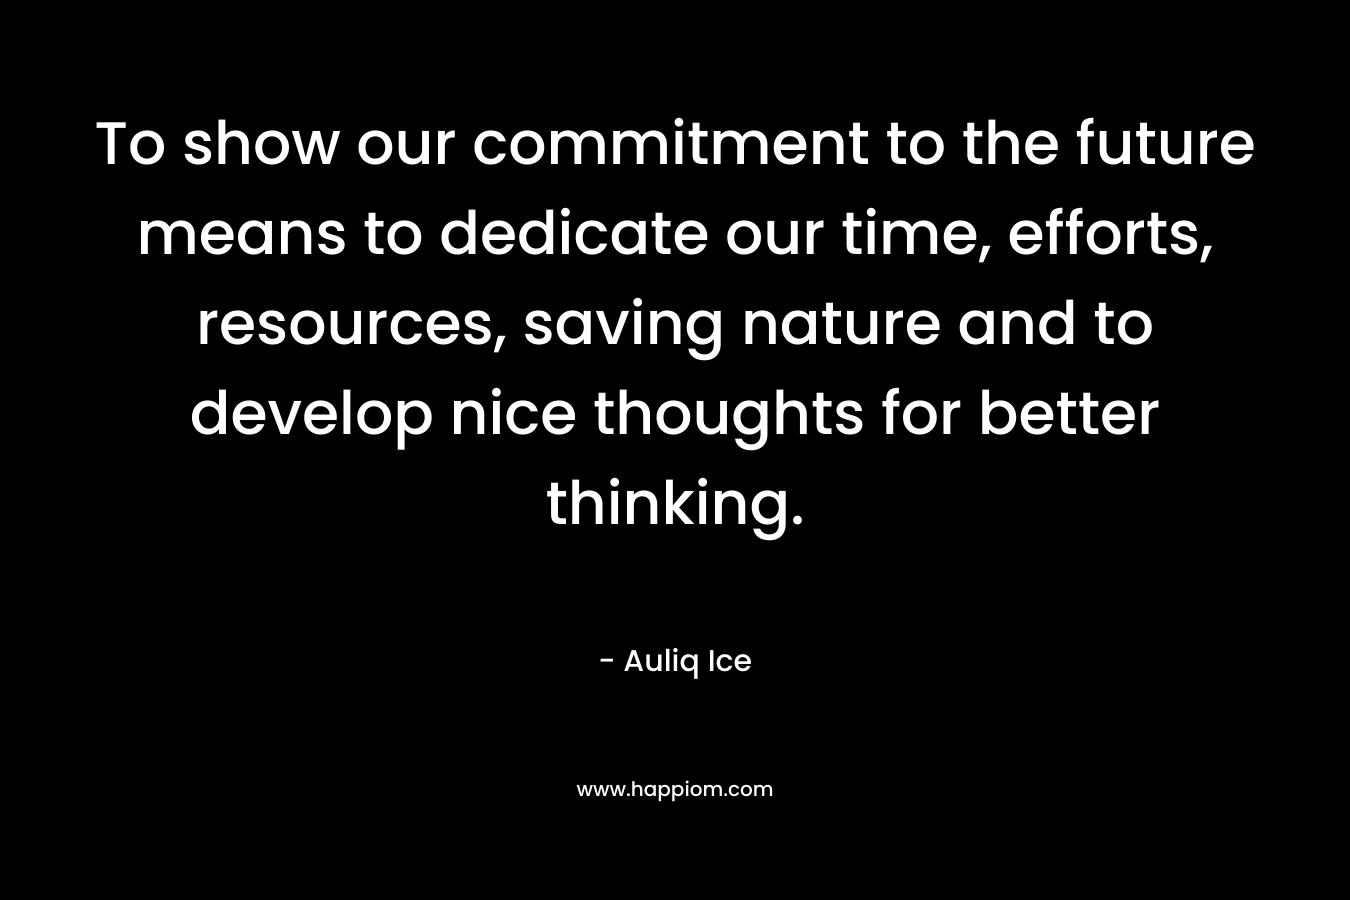 To show our commitment to the future means to dedicate our time, efforts, resources, saving nature and to develop nice thoughts for better thinking. – Auliq Ice